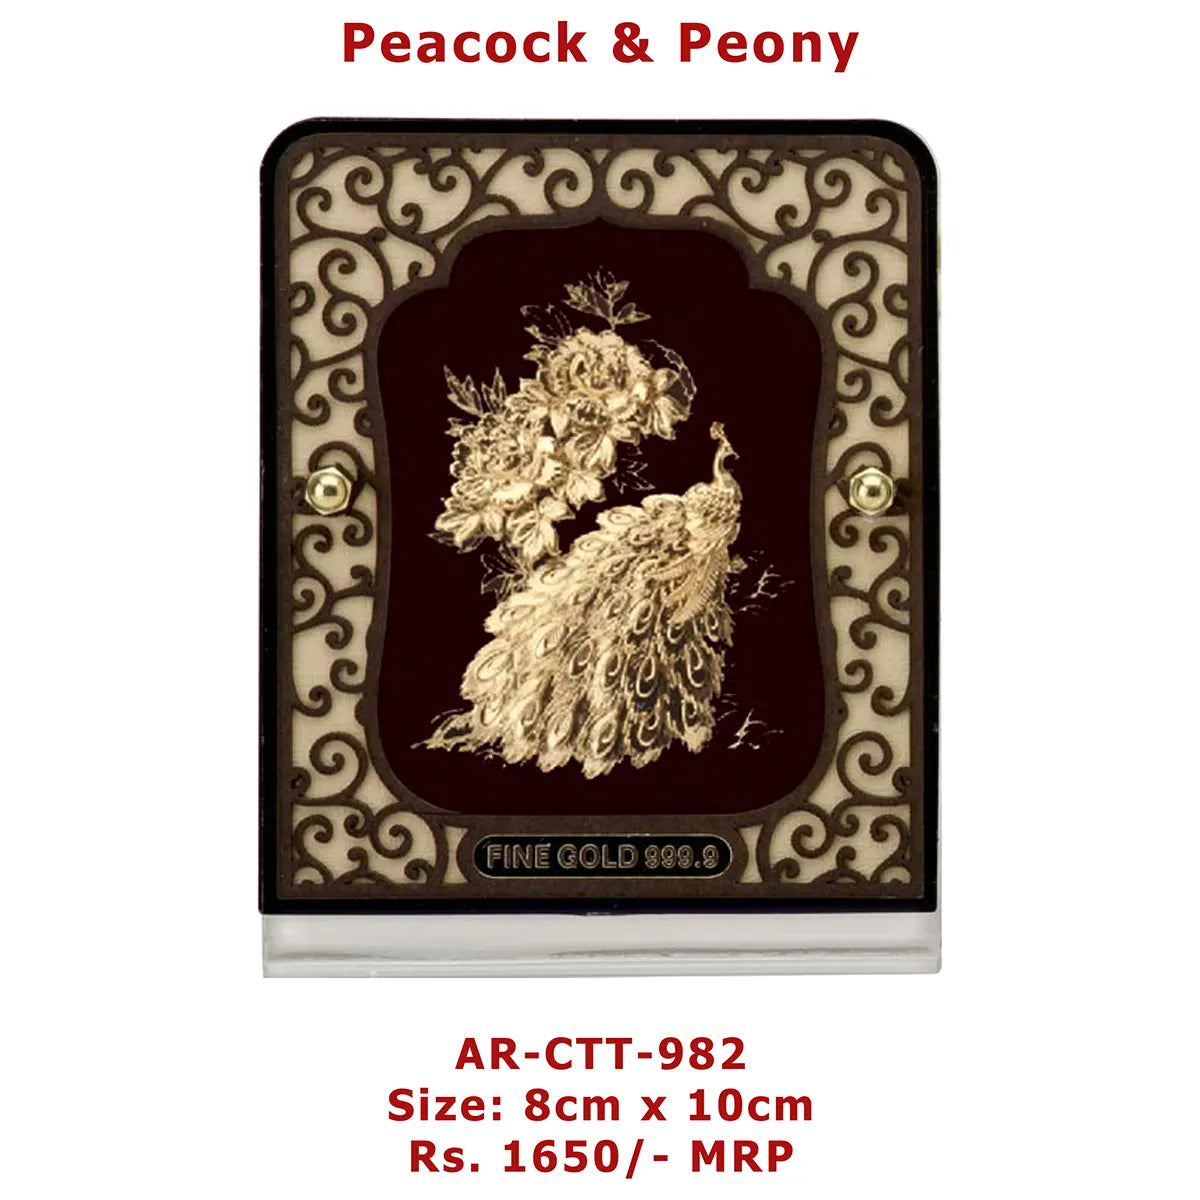 Peacock & Peony Table Top Frame M size